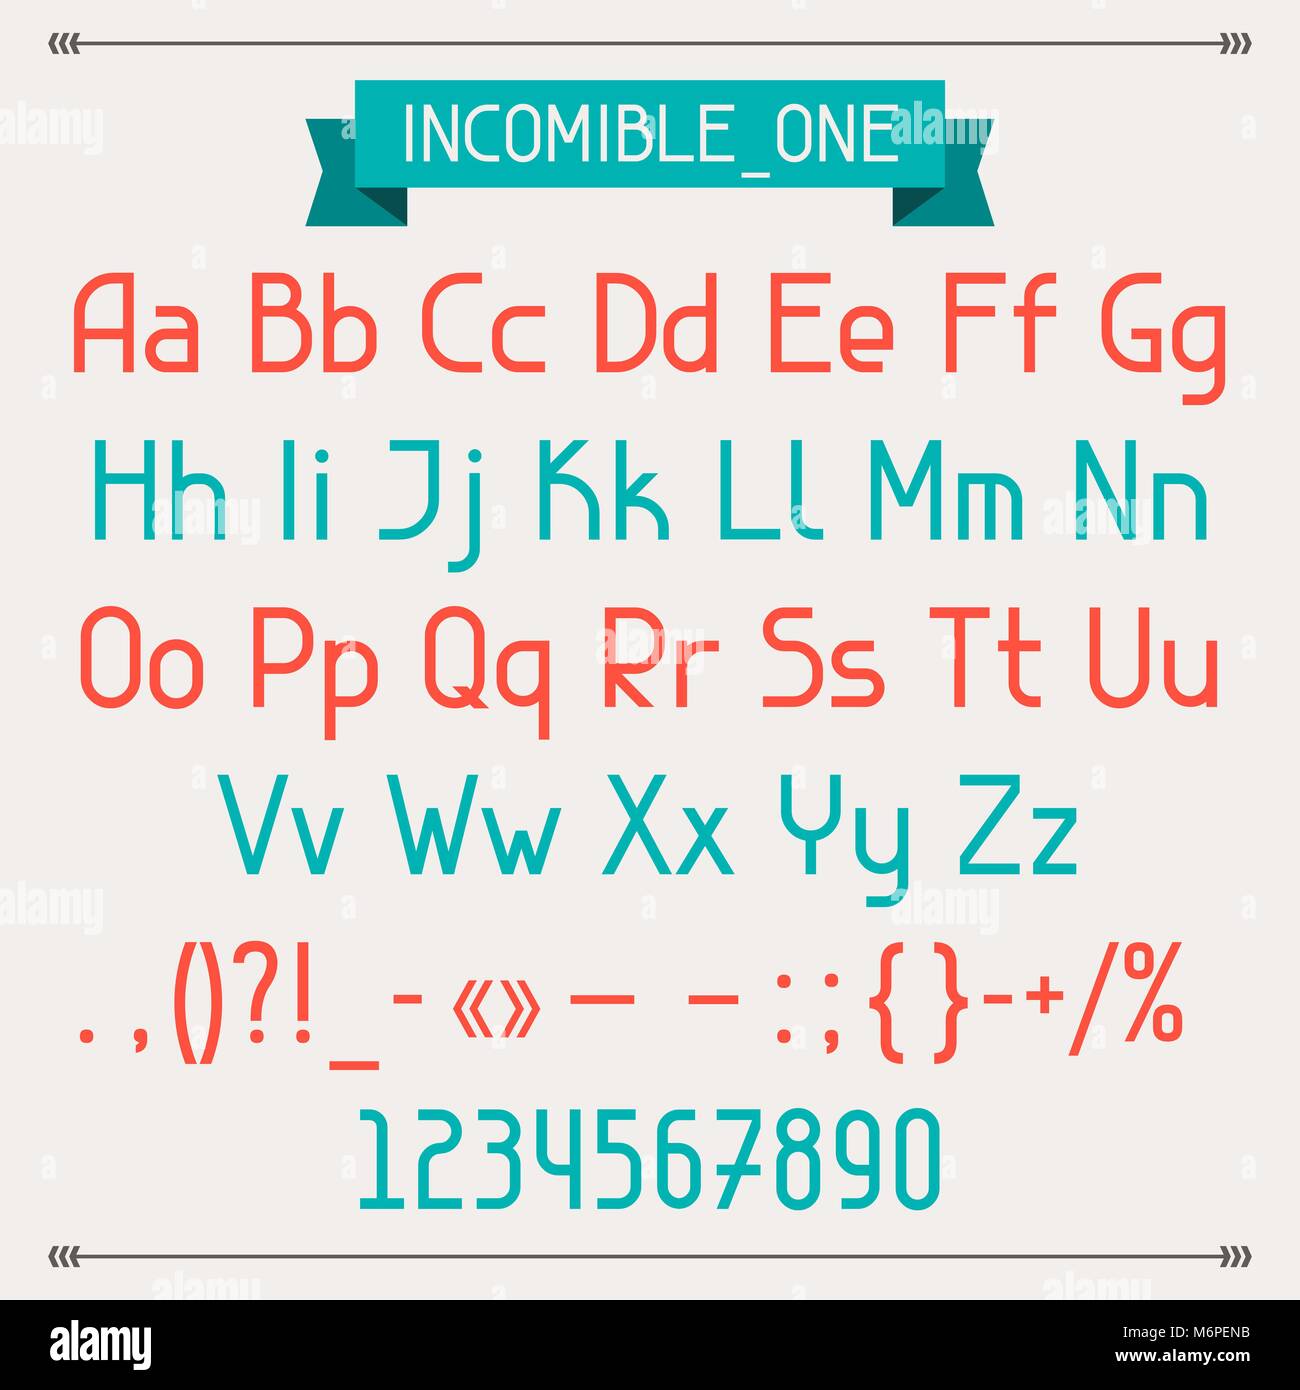 Incomible one Classic Style font Stock Vektor